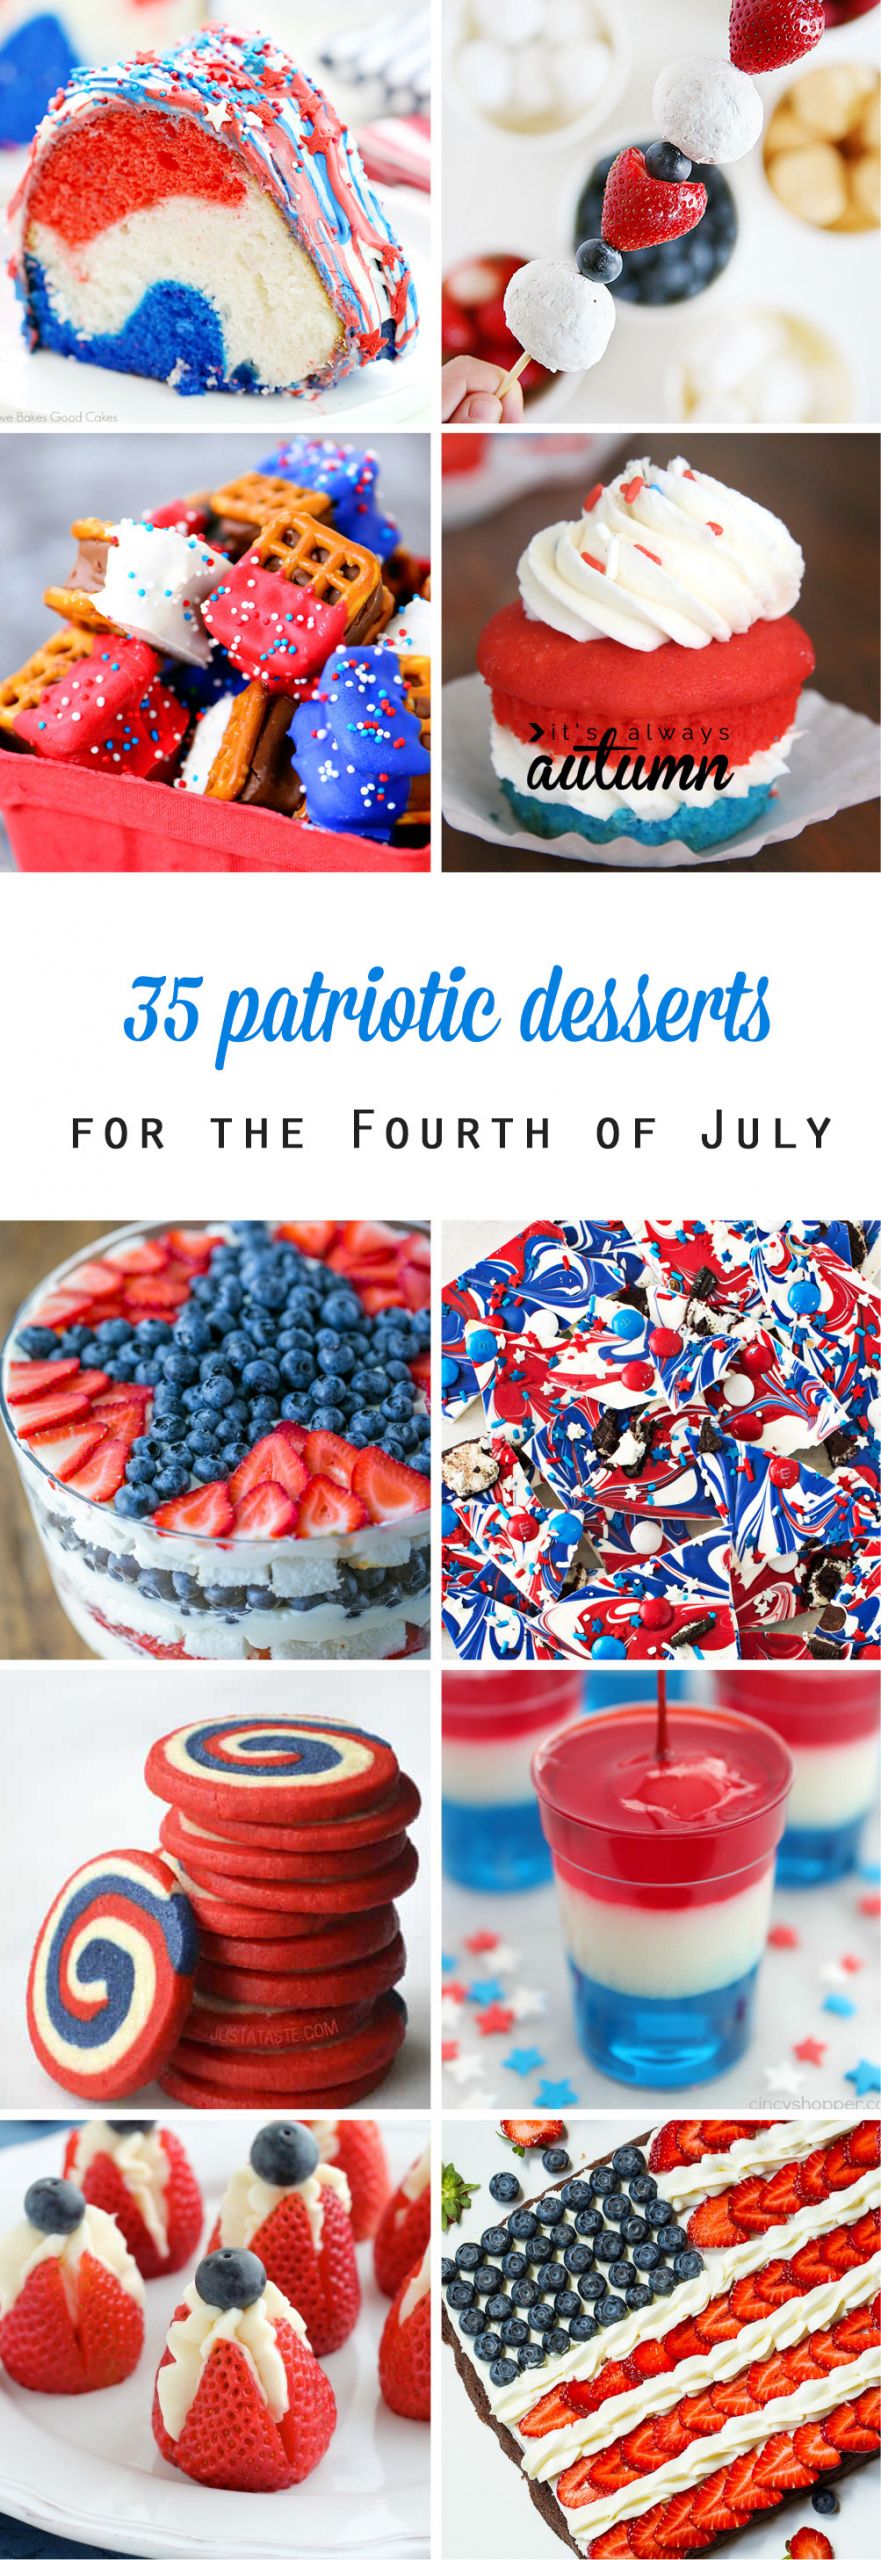 4th Of July Food
 20 red white and blue desserts for the Fourth of July